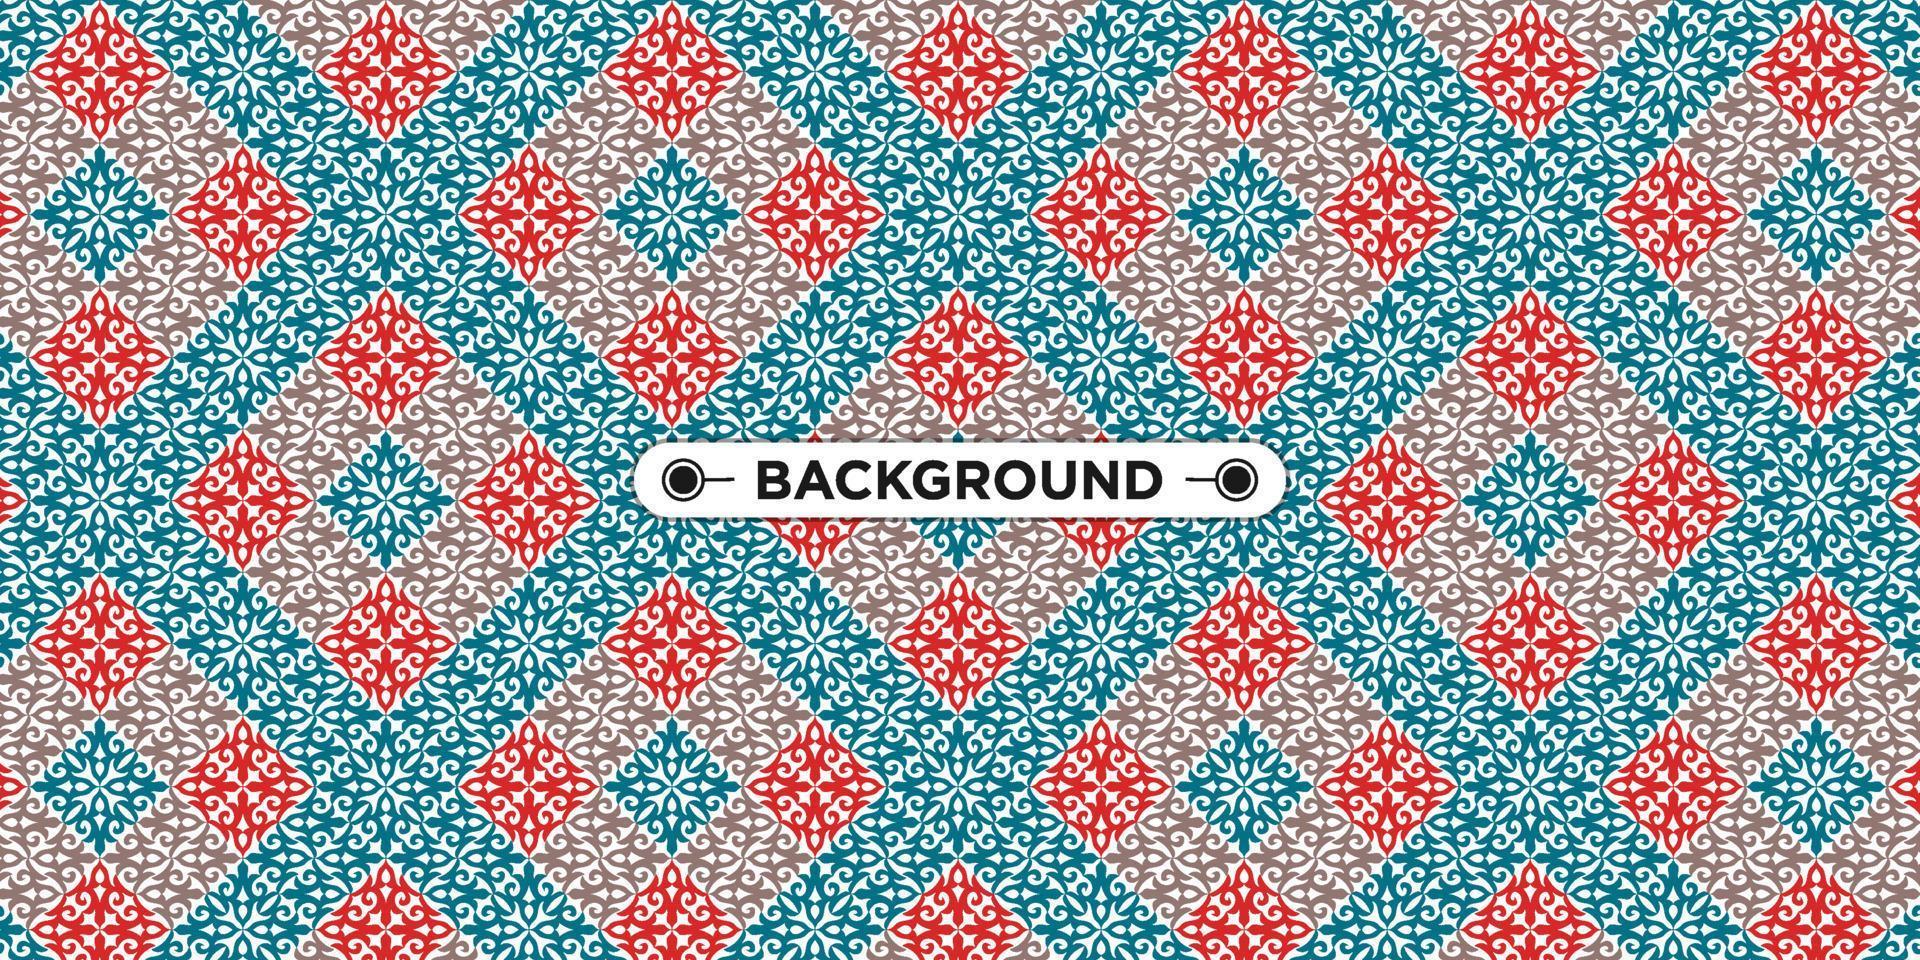 colorful background with ethnic texture vector